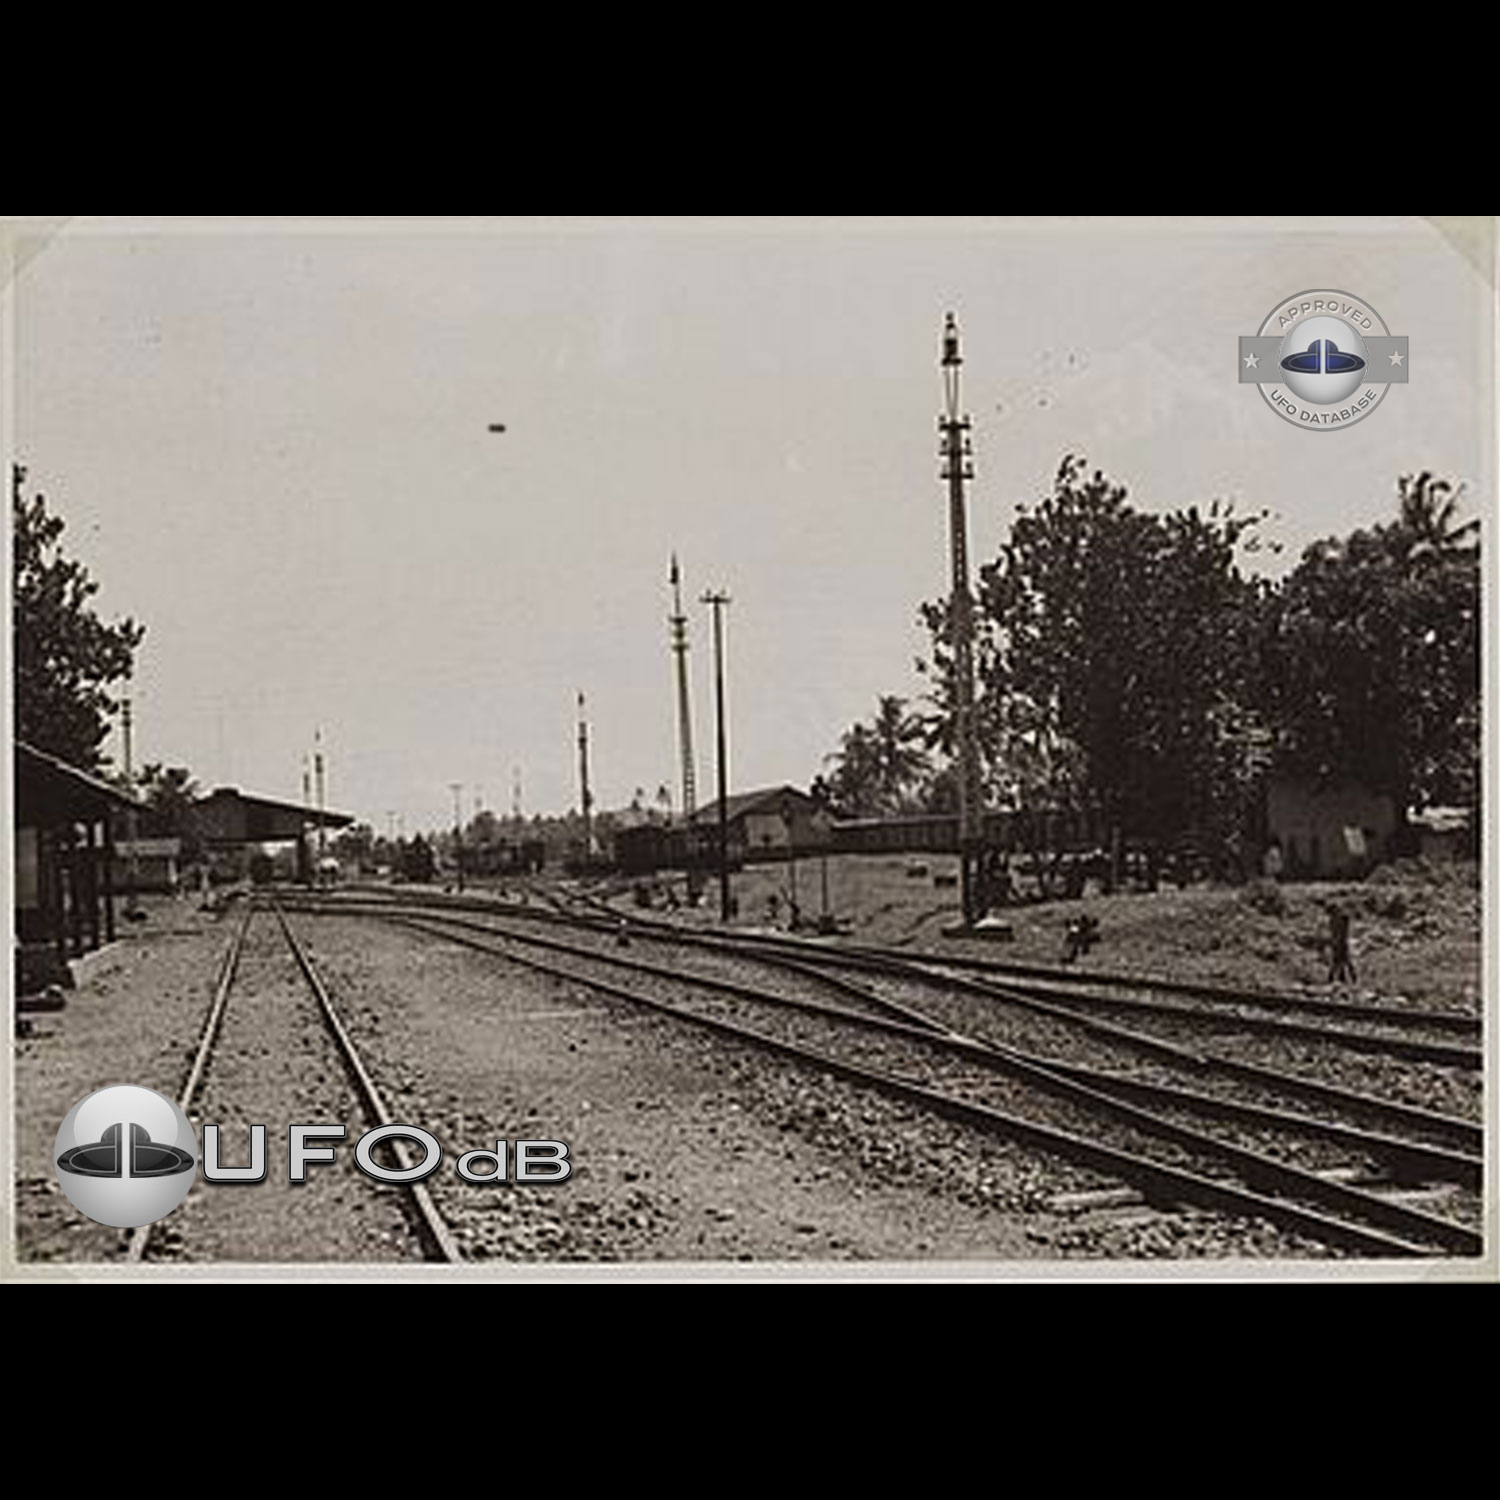 1935 | During the construction of the Dutch colonial state railway UFO Picture #121-1